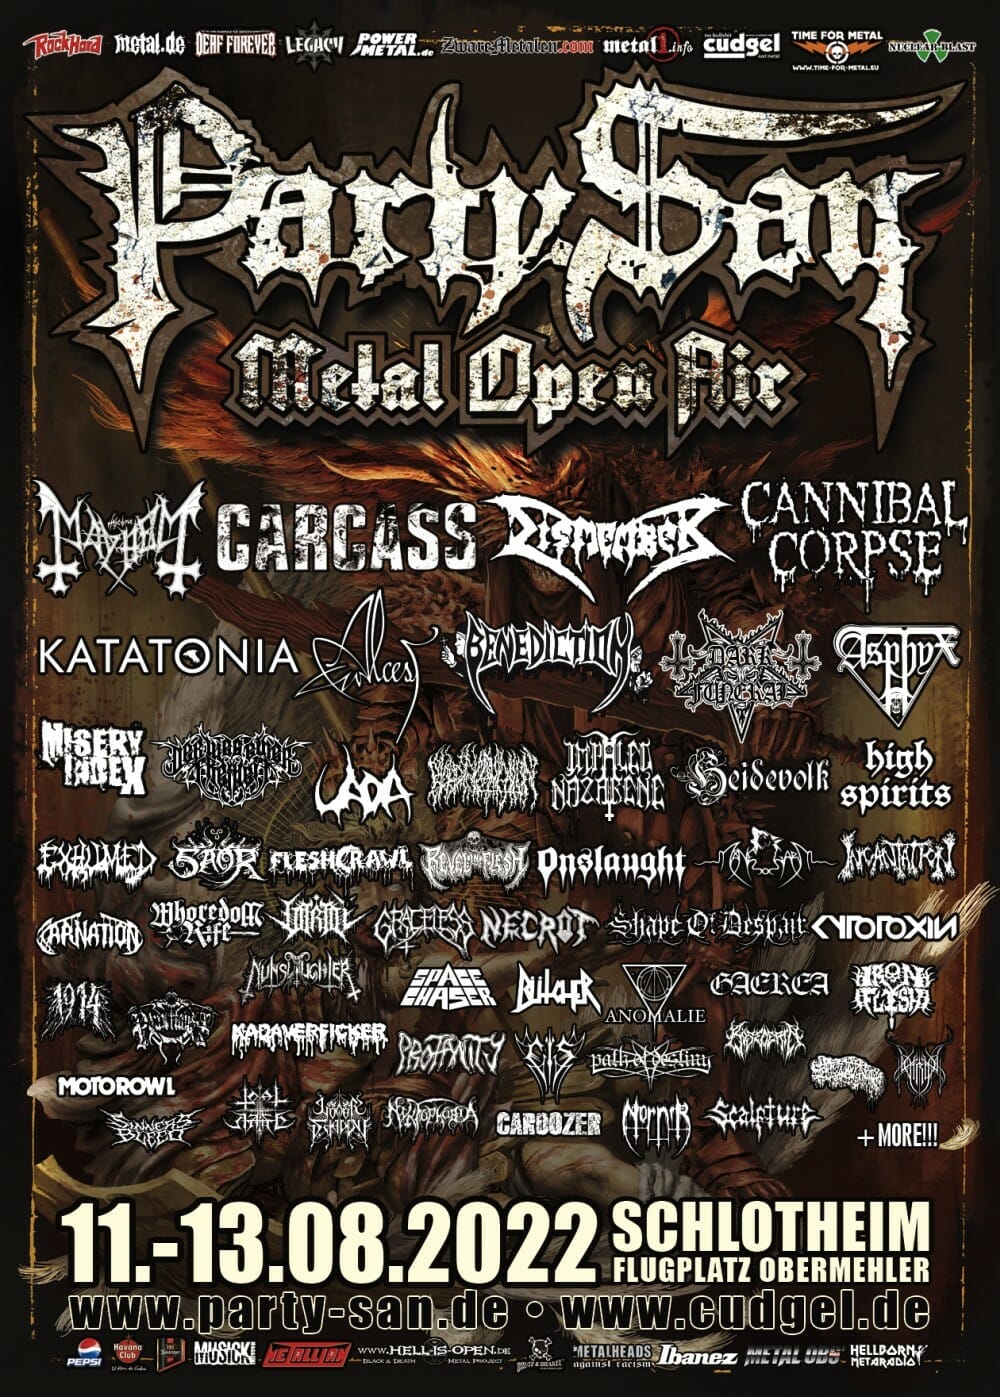 Poster des Billings vom Party.San Metal Open Air 2022 Stand November 2021